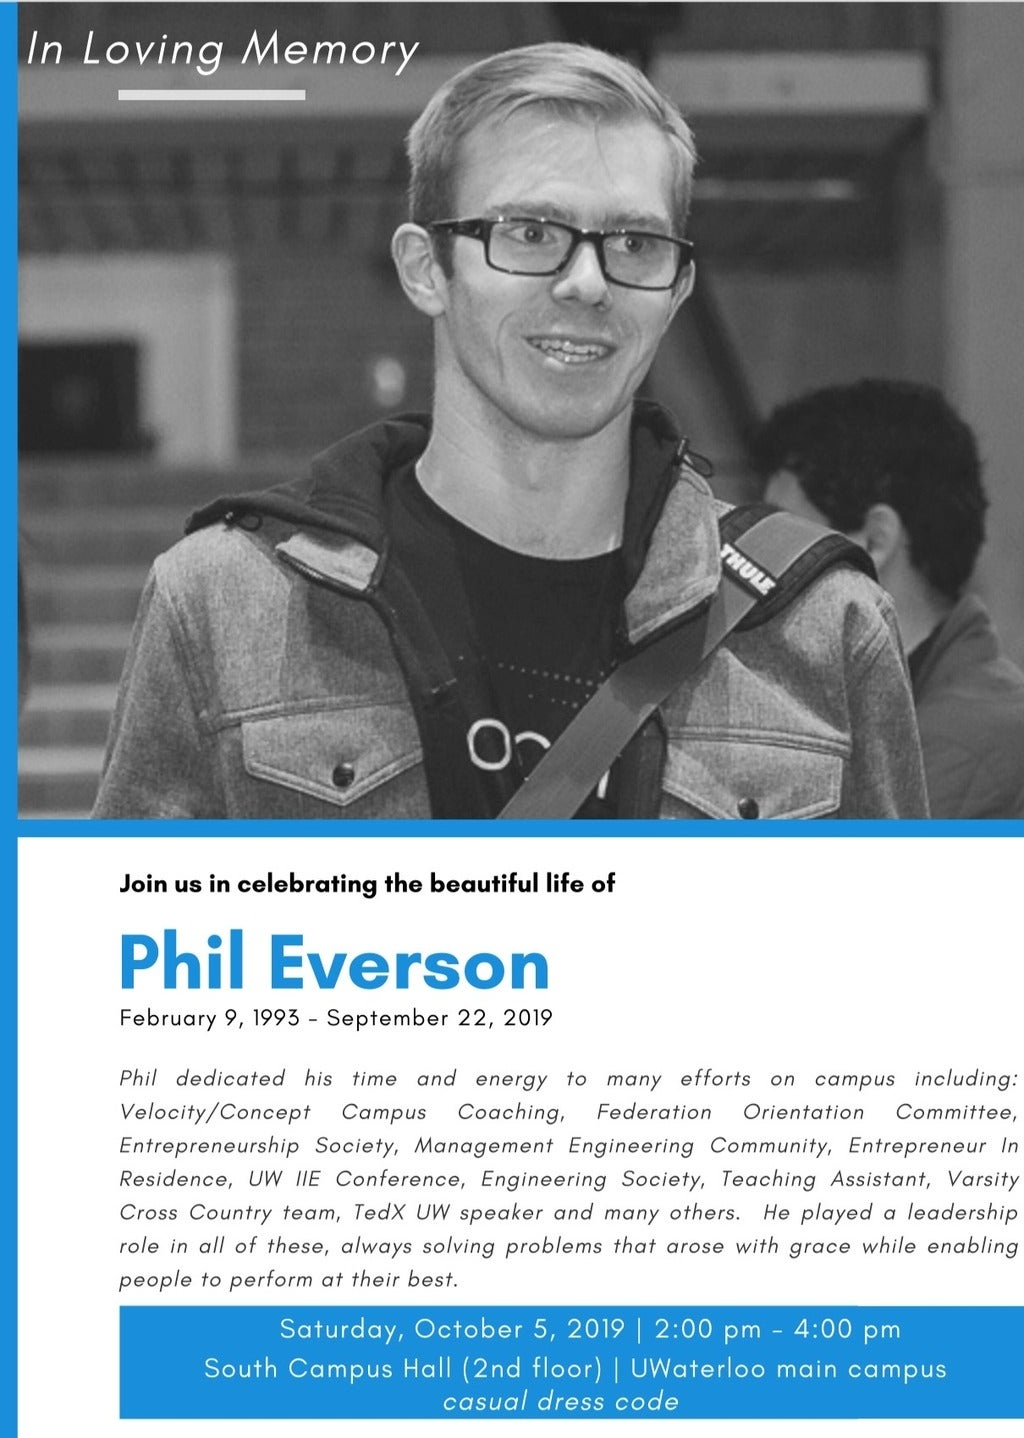 Memorial event for Phil Everson